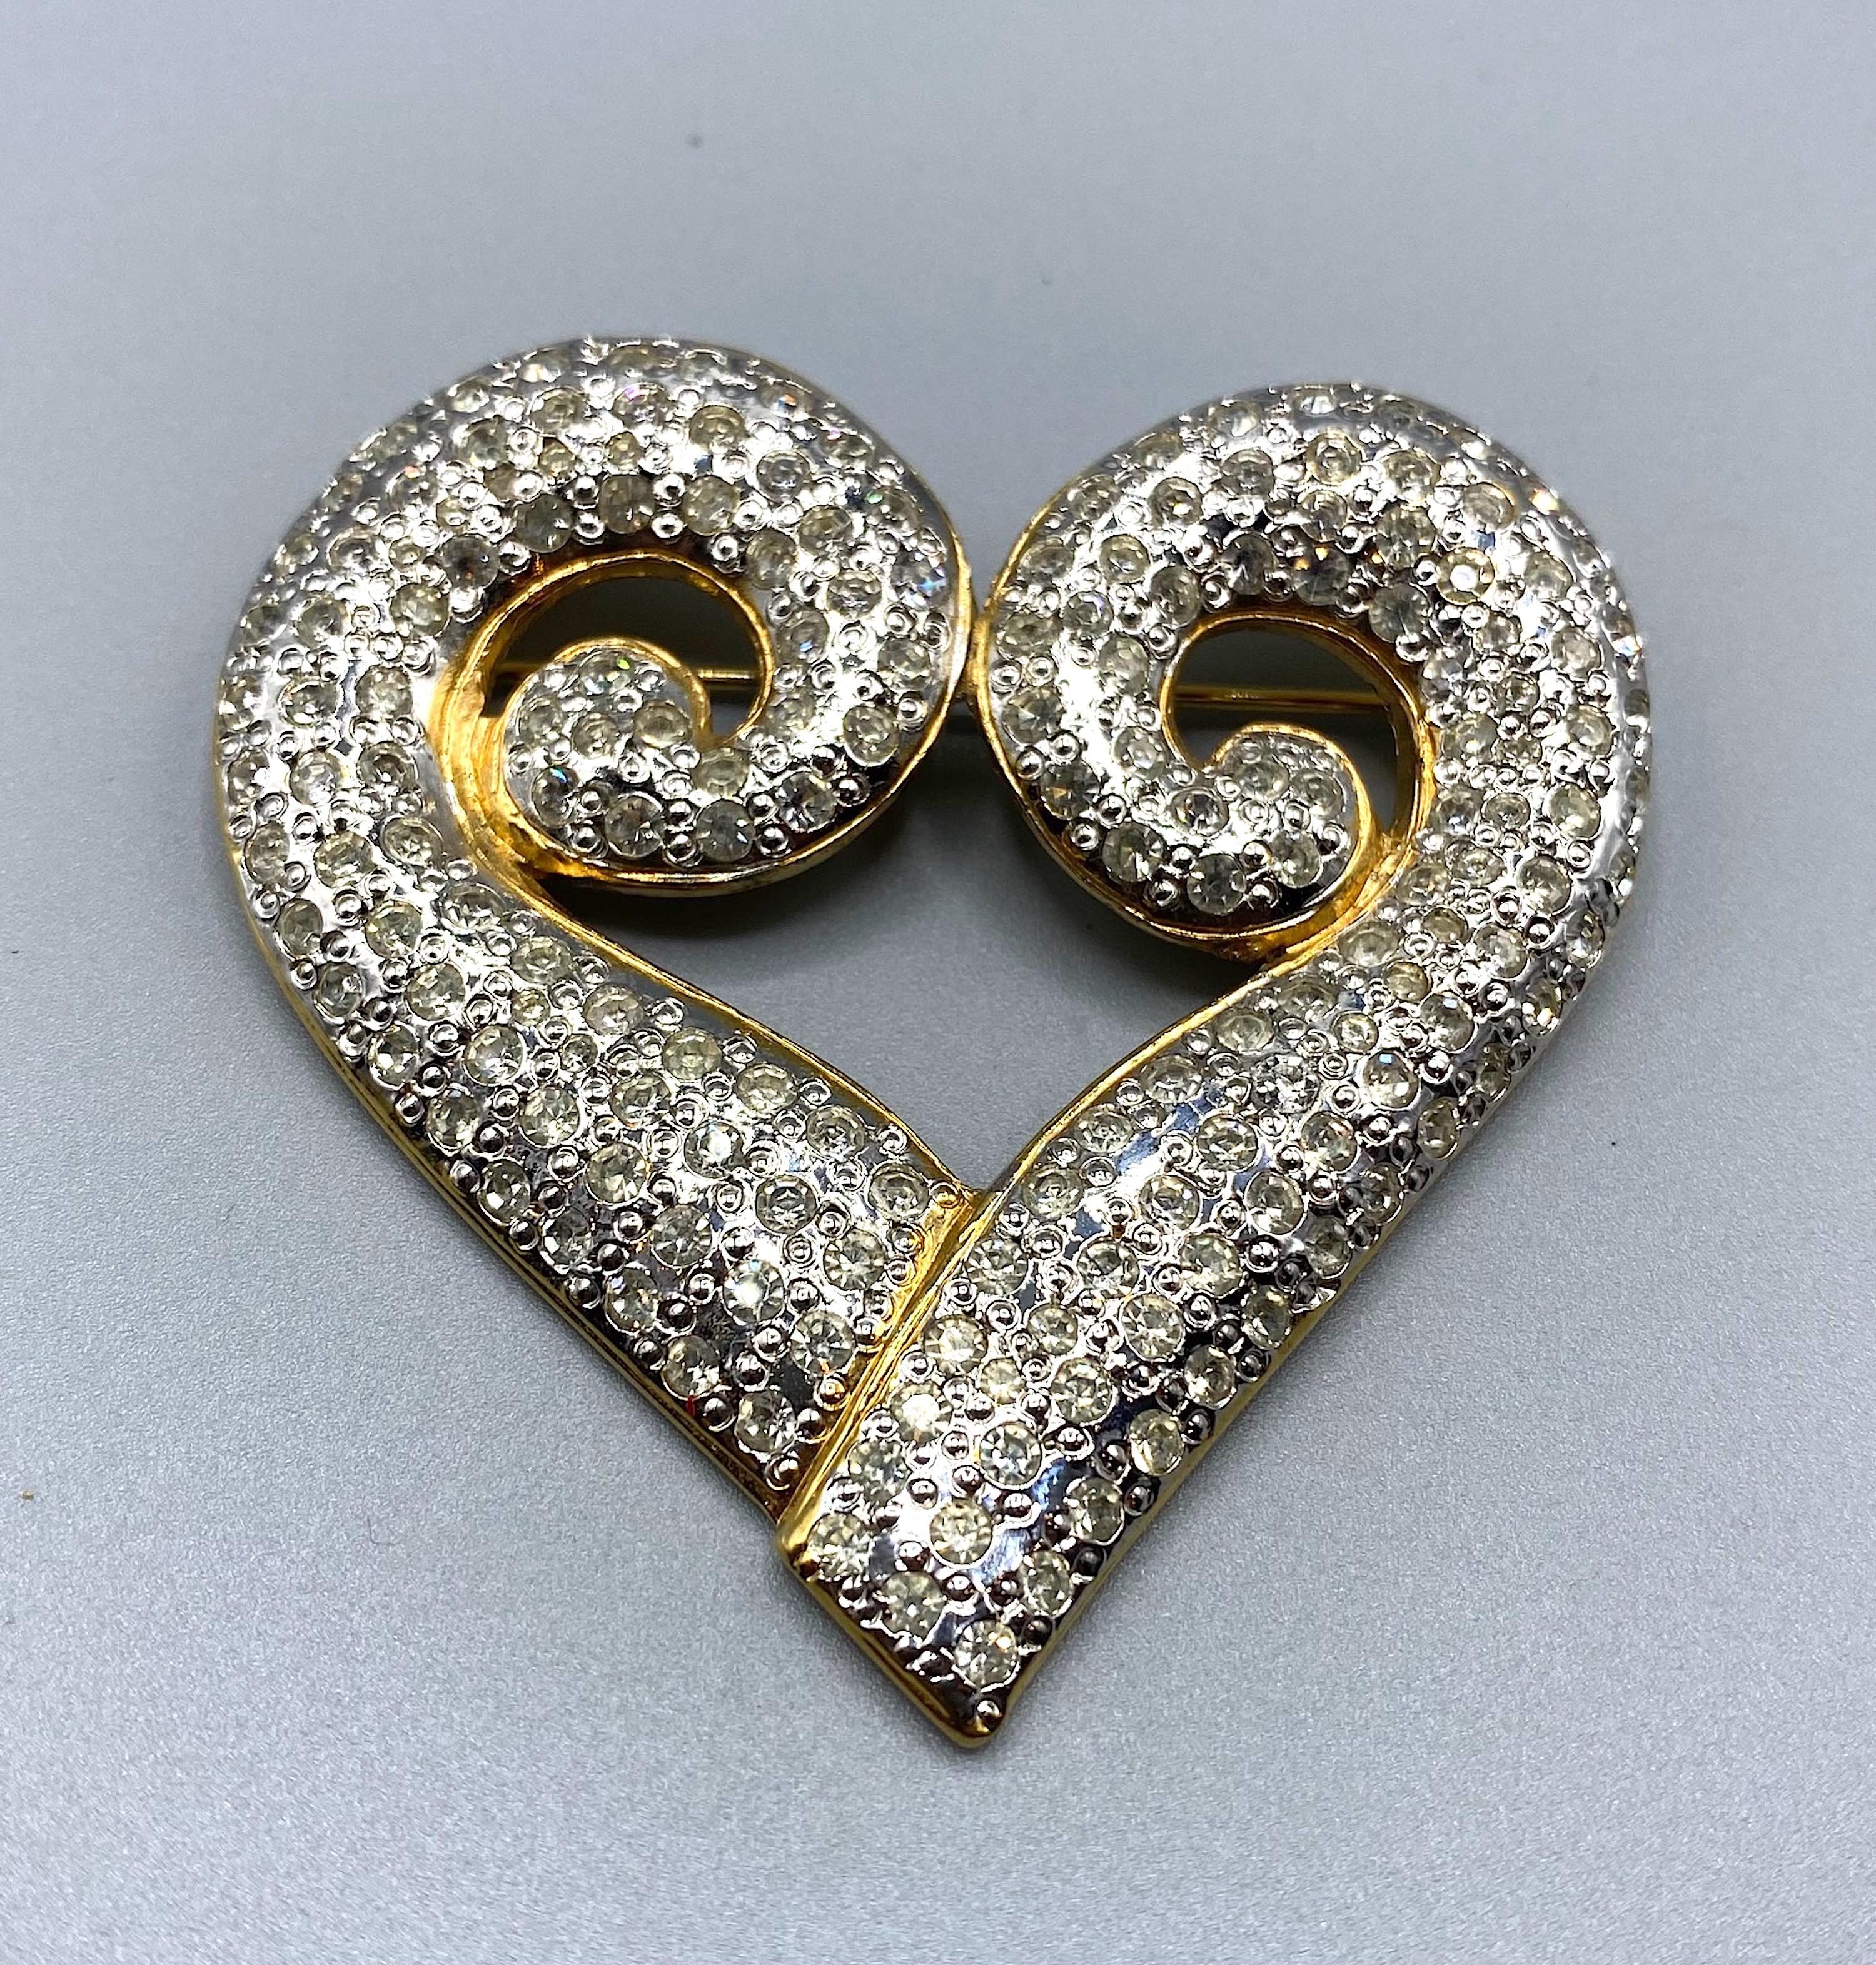 Beautiful gold and rhodium brooch by Robert Goosens design for Yves Saint Laurent in the shape of a heart.
This brooch is studded with rhinestones, which gives it extreme brightness
Signed YSL on the back.
Measures 2.5